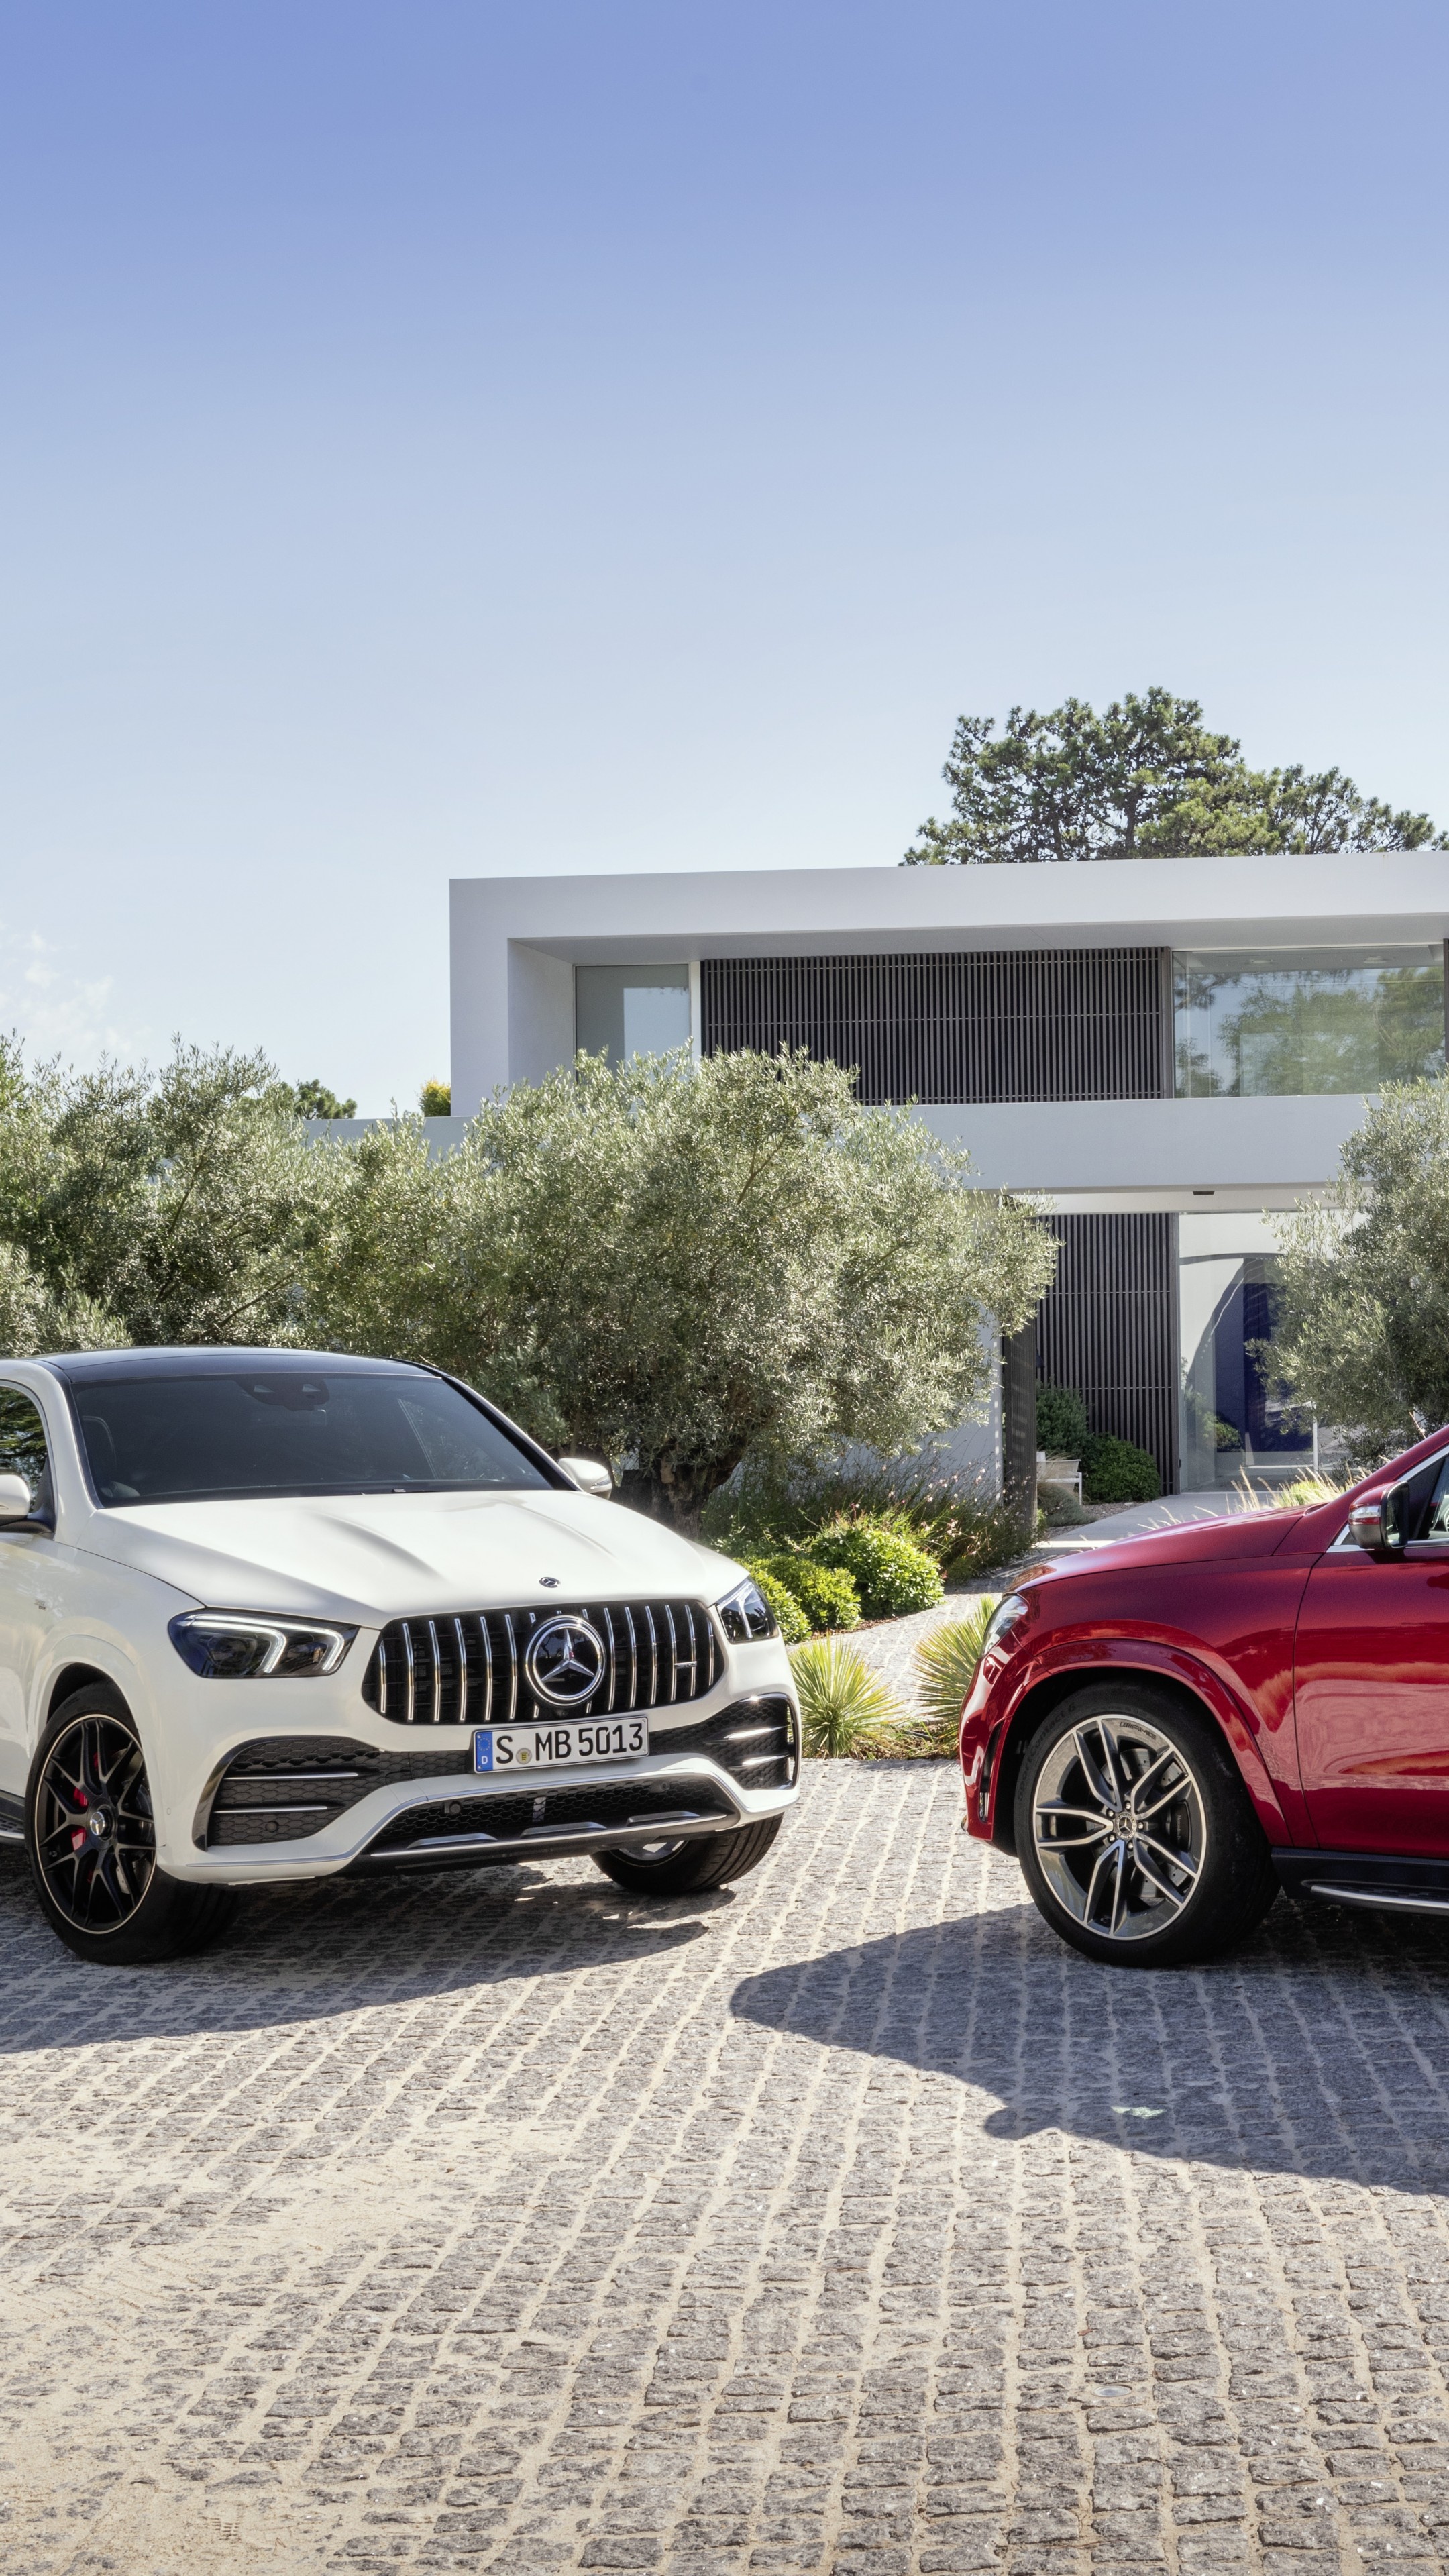 Mercedes-Benz GLE, AMG coupe, 2020 model, Cars and bikes, 2160x3840 4K Handy